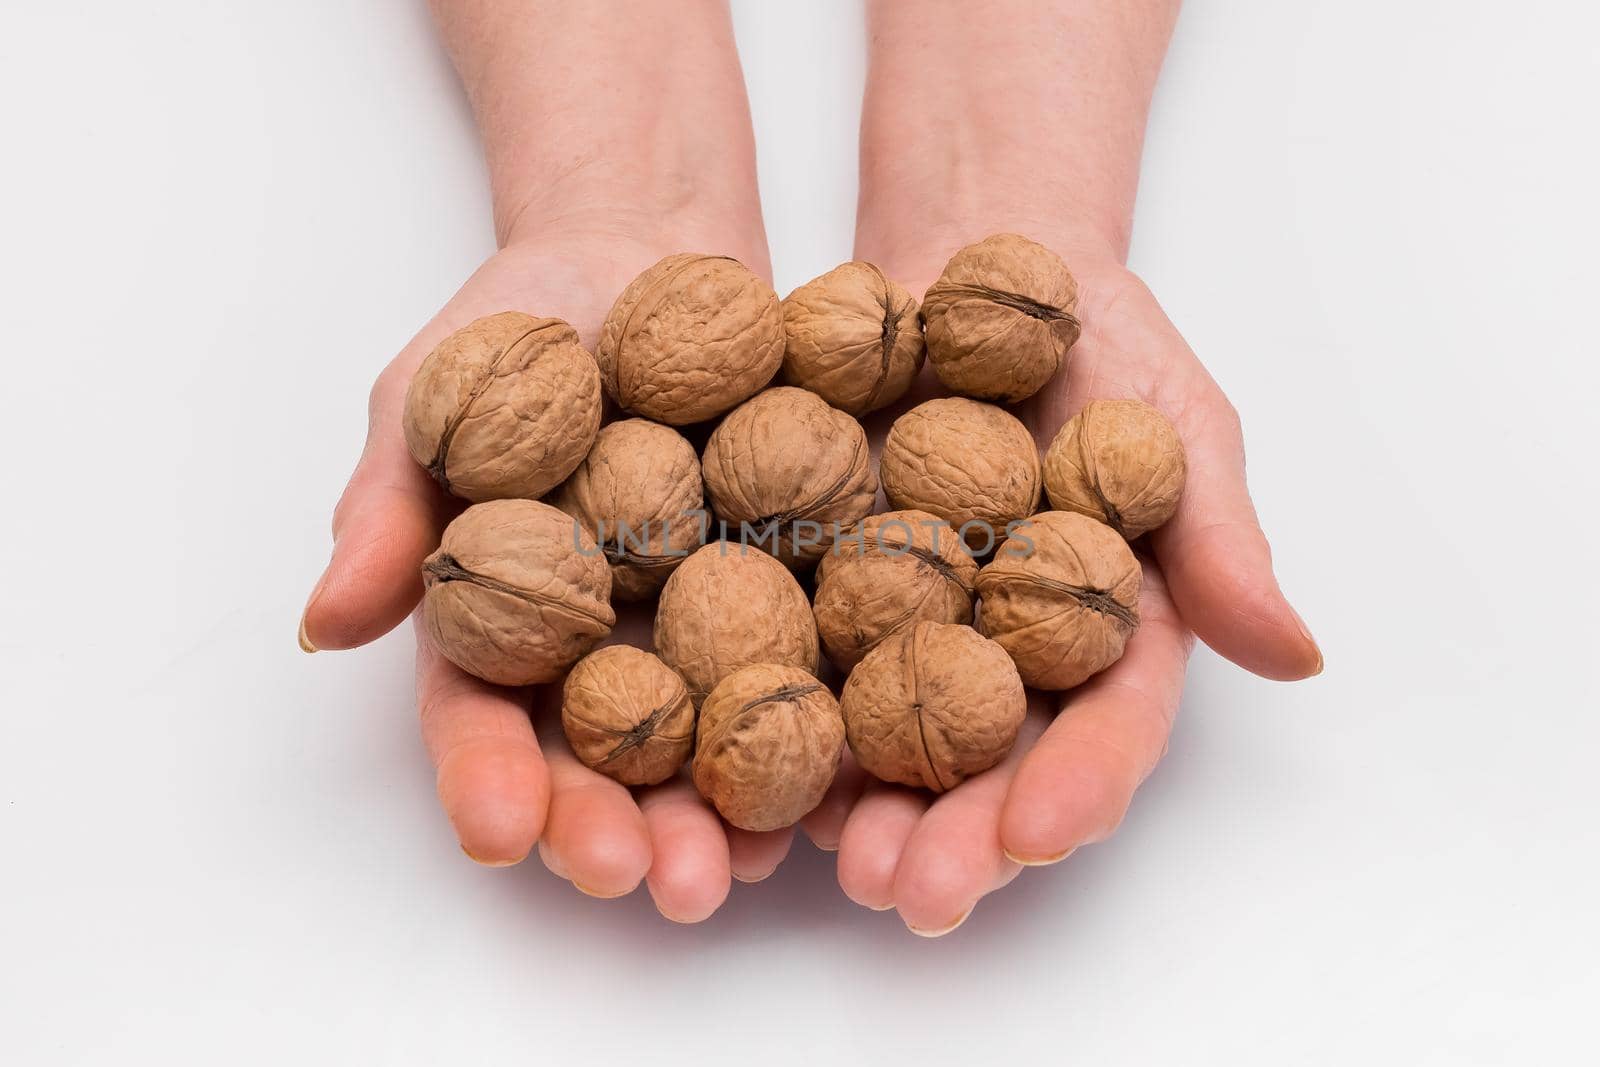 Woman stretches out her hands with a bunch of walnuts on a white background, isolated. Nut concept.